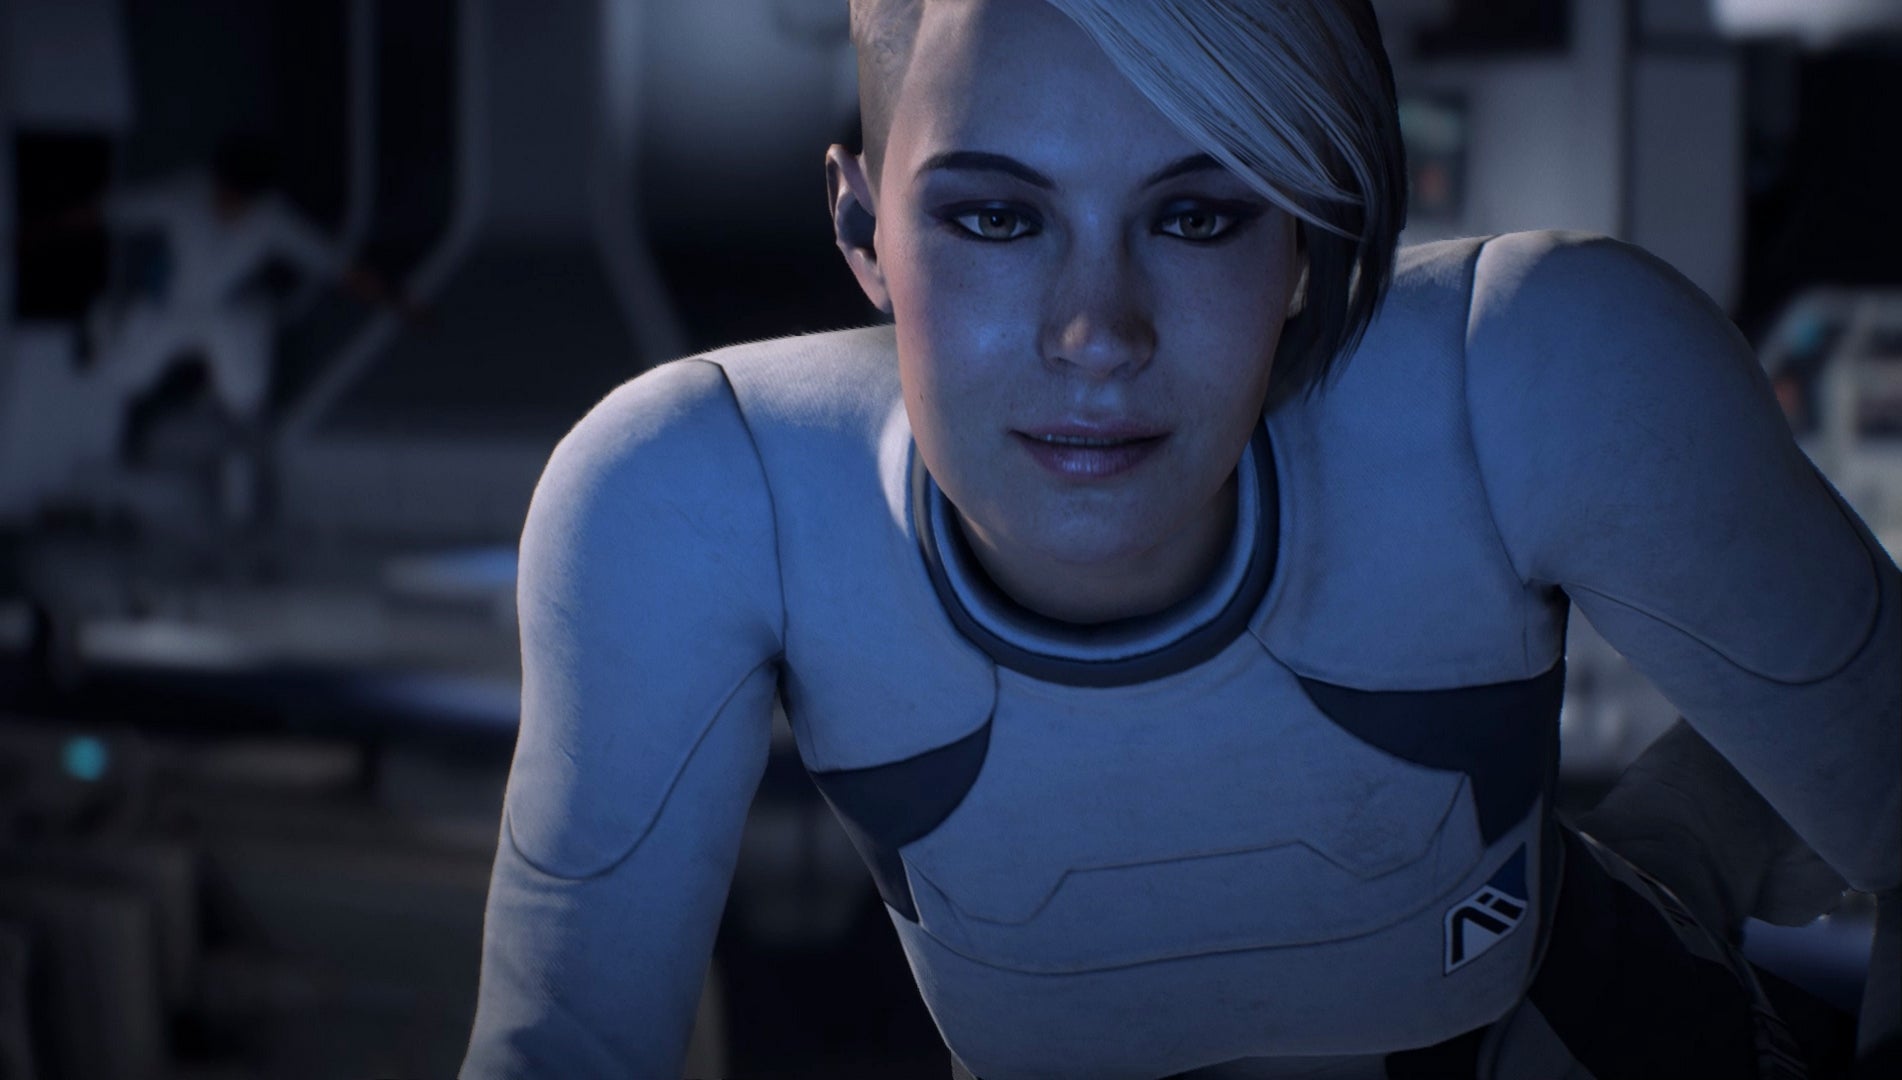 Image for BioWare celebrates N7 Day with Xbox One X patch for Mass Effect Andromeda, hints at a future for the series